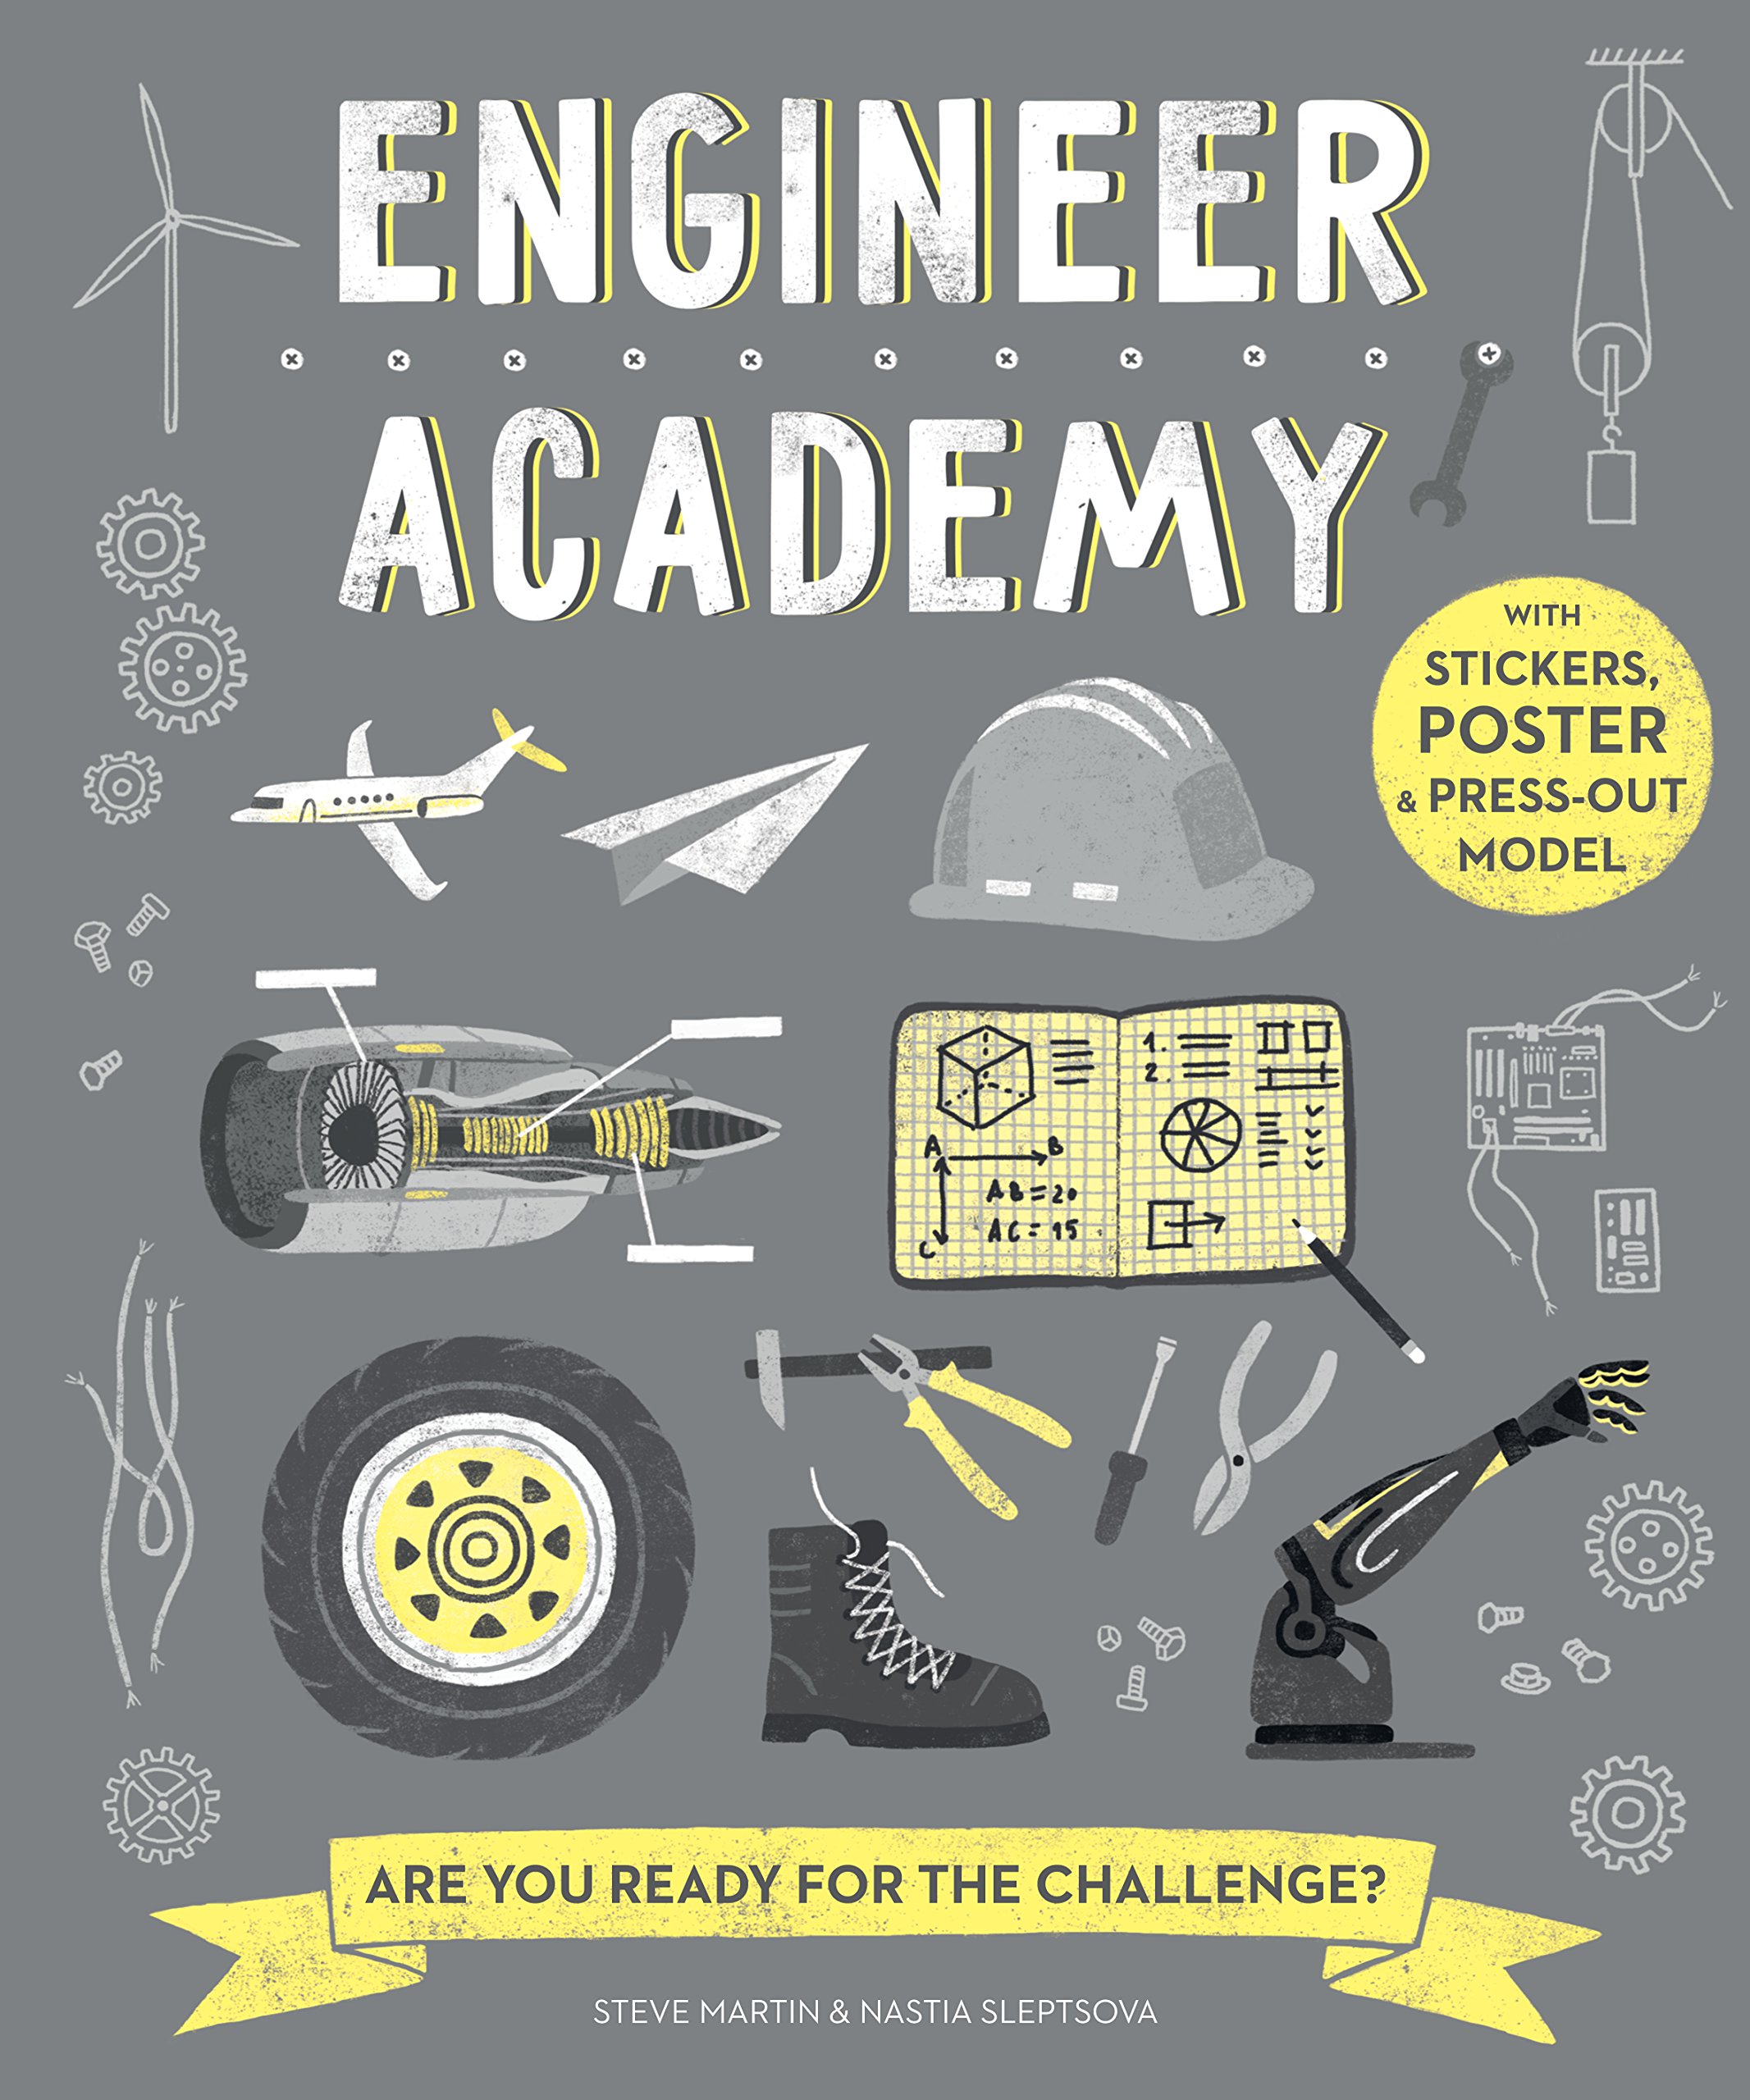 Engineer Academy - Are you ready for the challenge? | Steve Martin